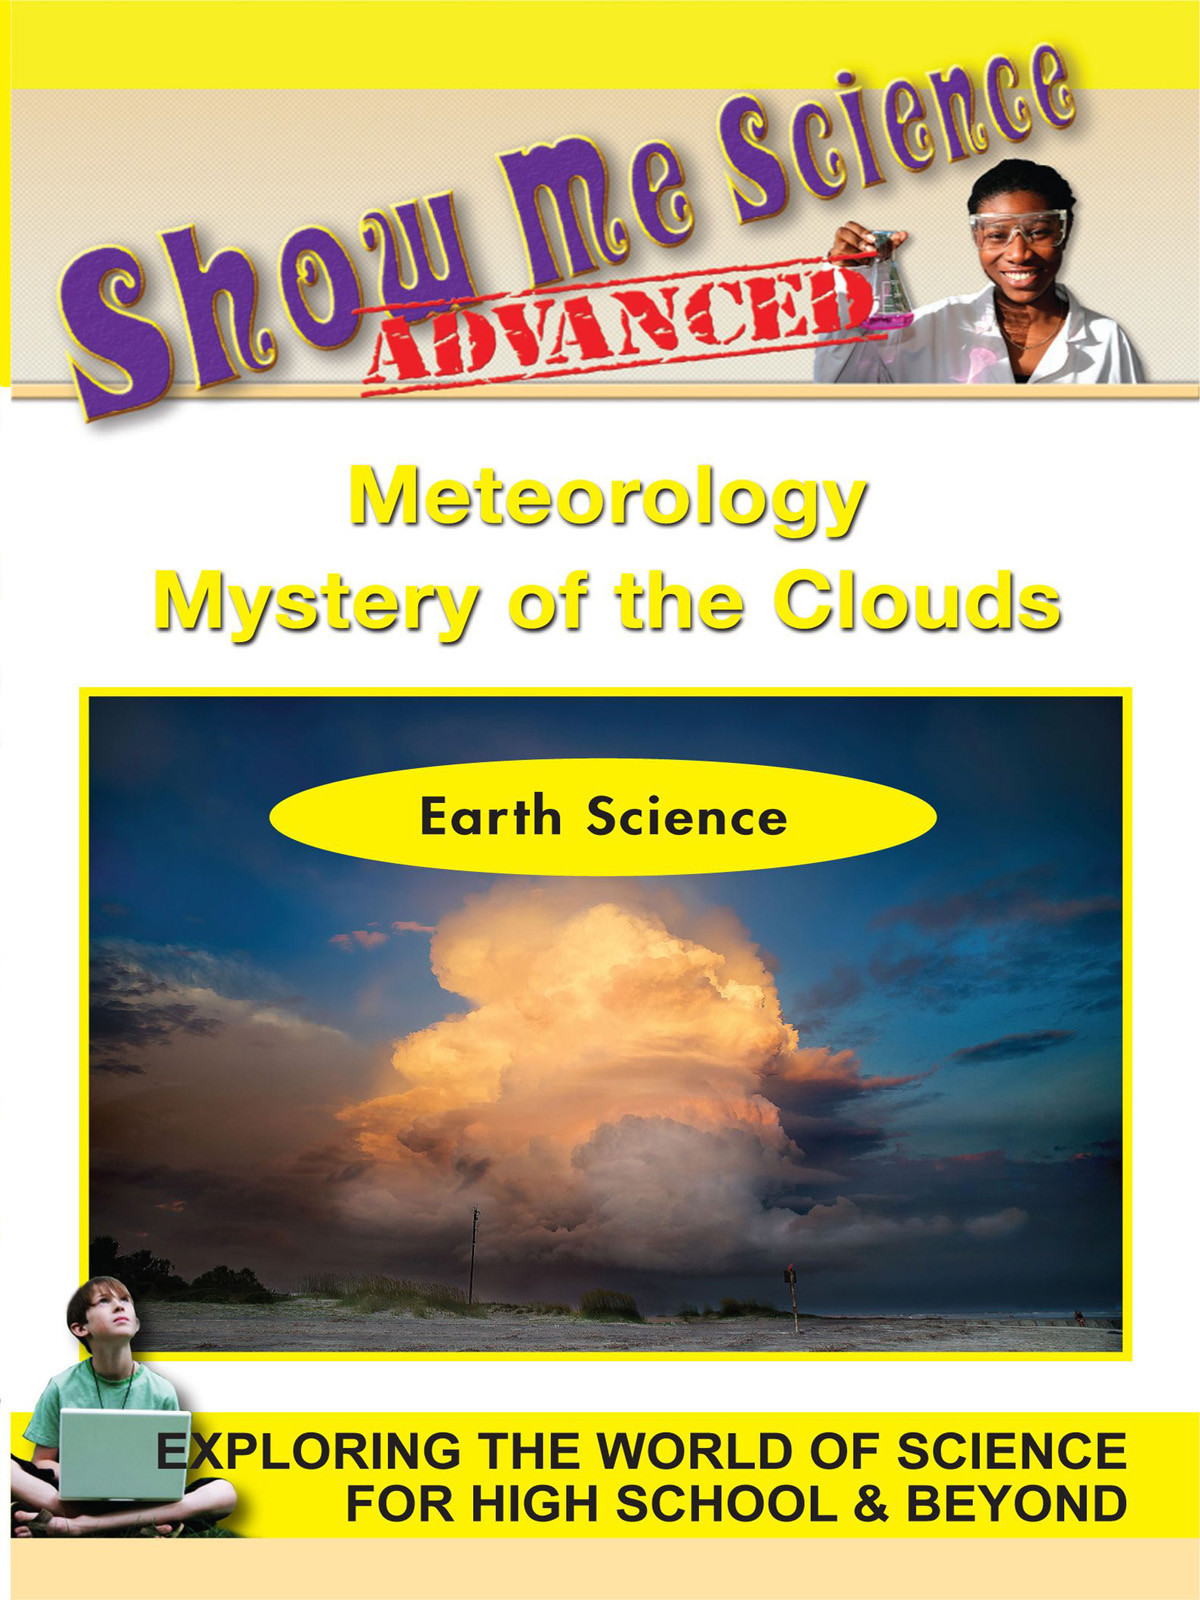 K4628 - Earth Science Meteorology Mystery of the Clouds